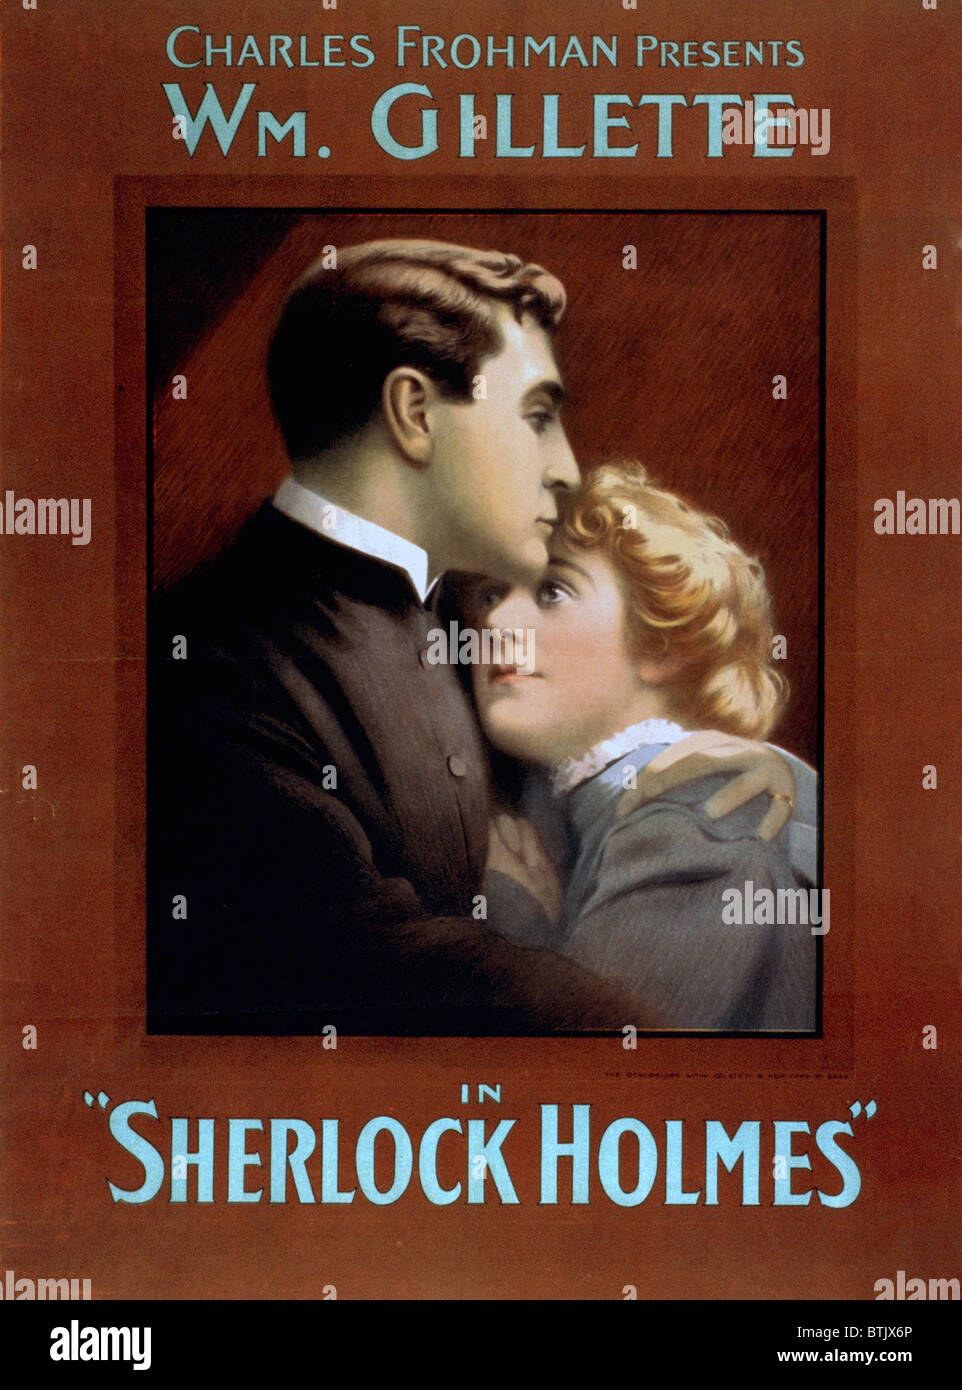 Poster for William Gillette (1853-1937), American playwright and actor portrayed Sherlock Holmes in plays he created from the stories of Sir Arthur Conan Doyle. Ca. 1900. Stock Photo